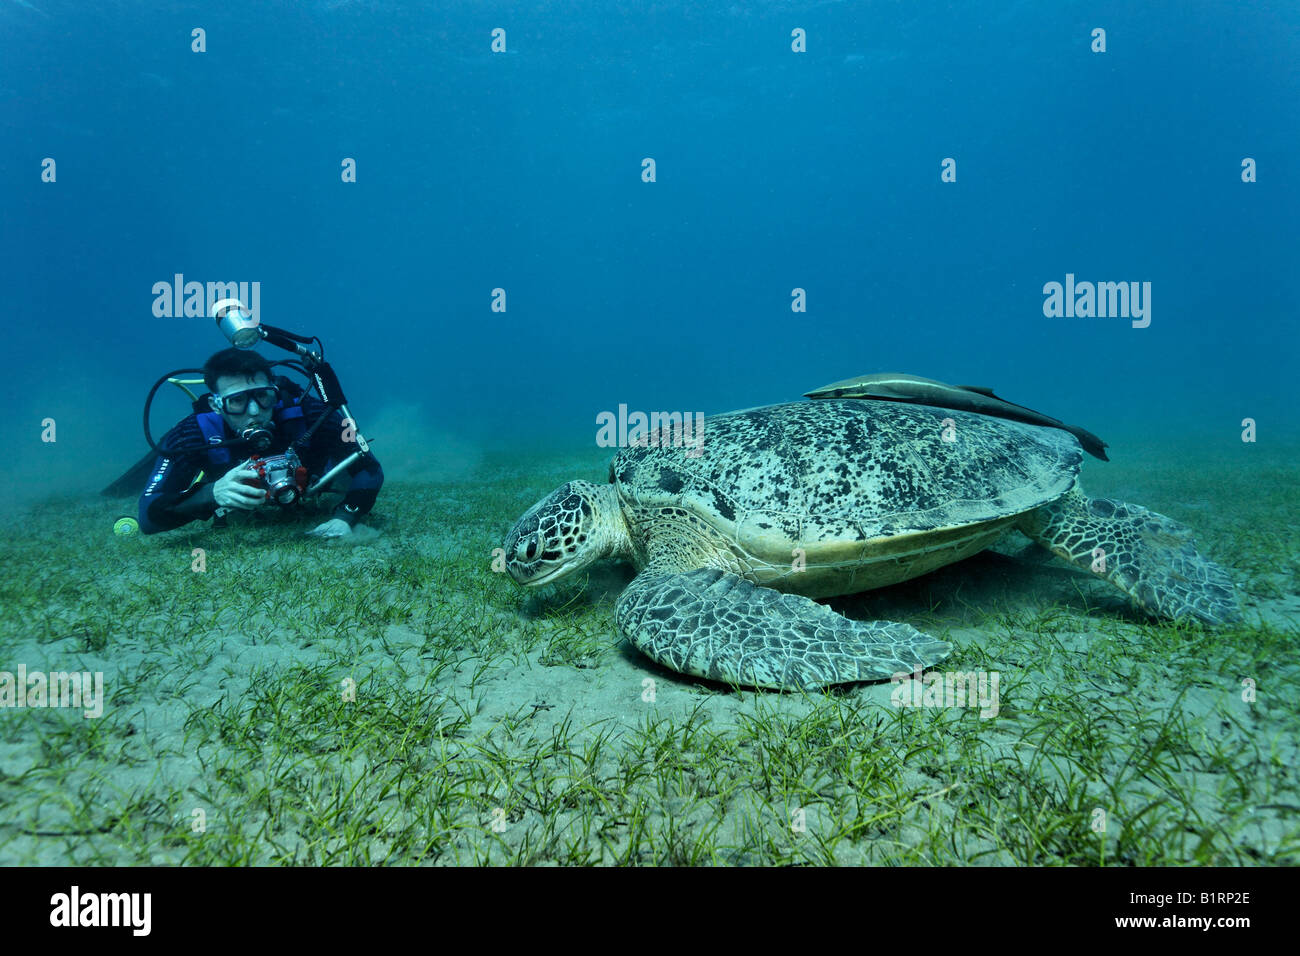 Underwater photographer taking a picture of a Green Sea Turtle (Chelonia mydas) with suckerfish, Hurghada, Red Sea, Egypt, Afri Stock Photo